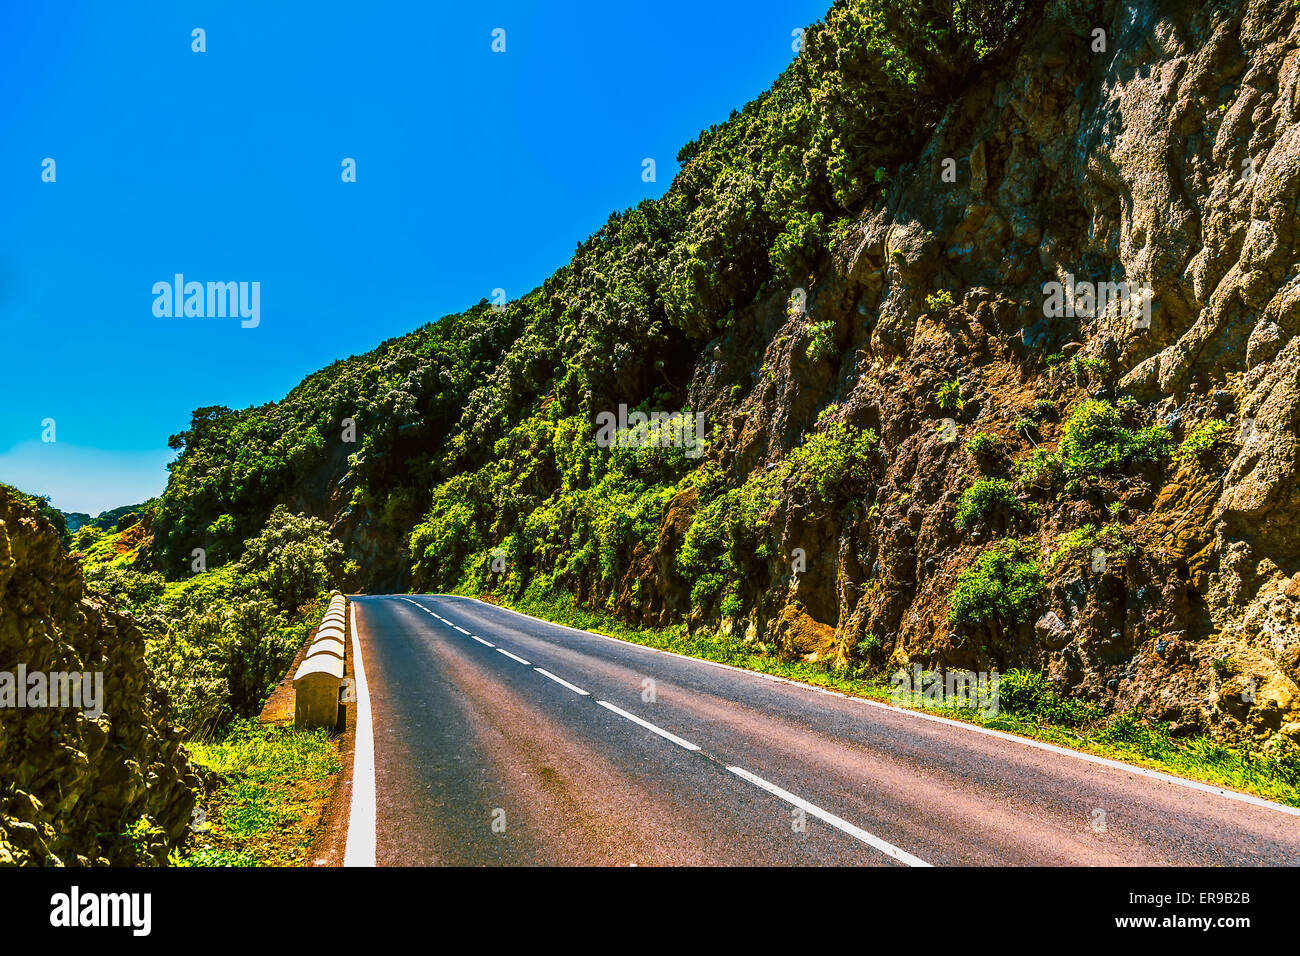 Asphalt road in green mountains with blue sky in Tenerife Canary island, Spain at spring or summer Stock Photo